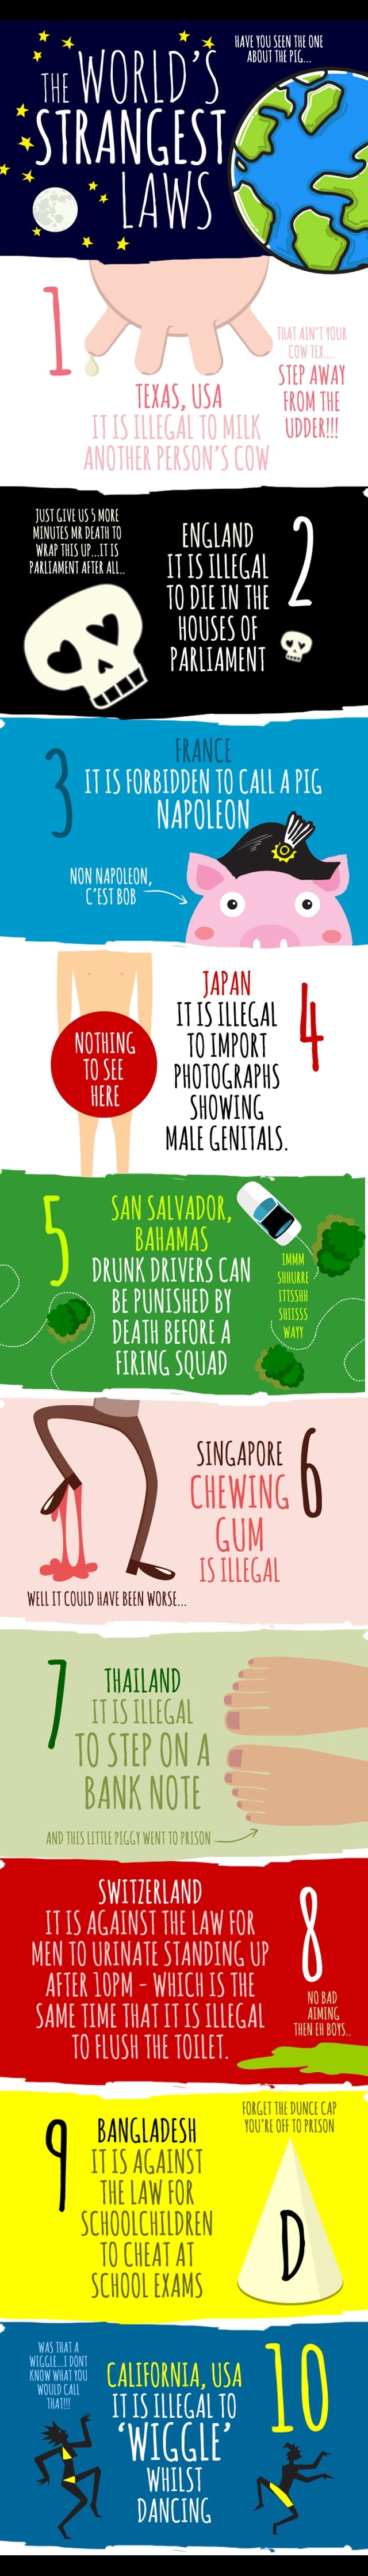 the-worlds-strangest-laws-infographic